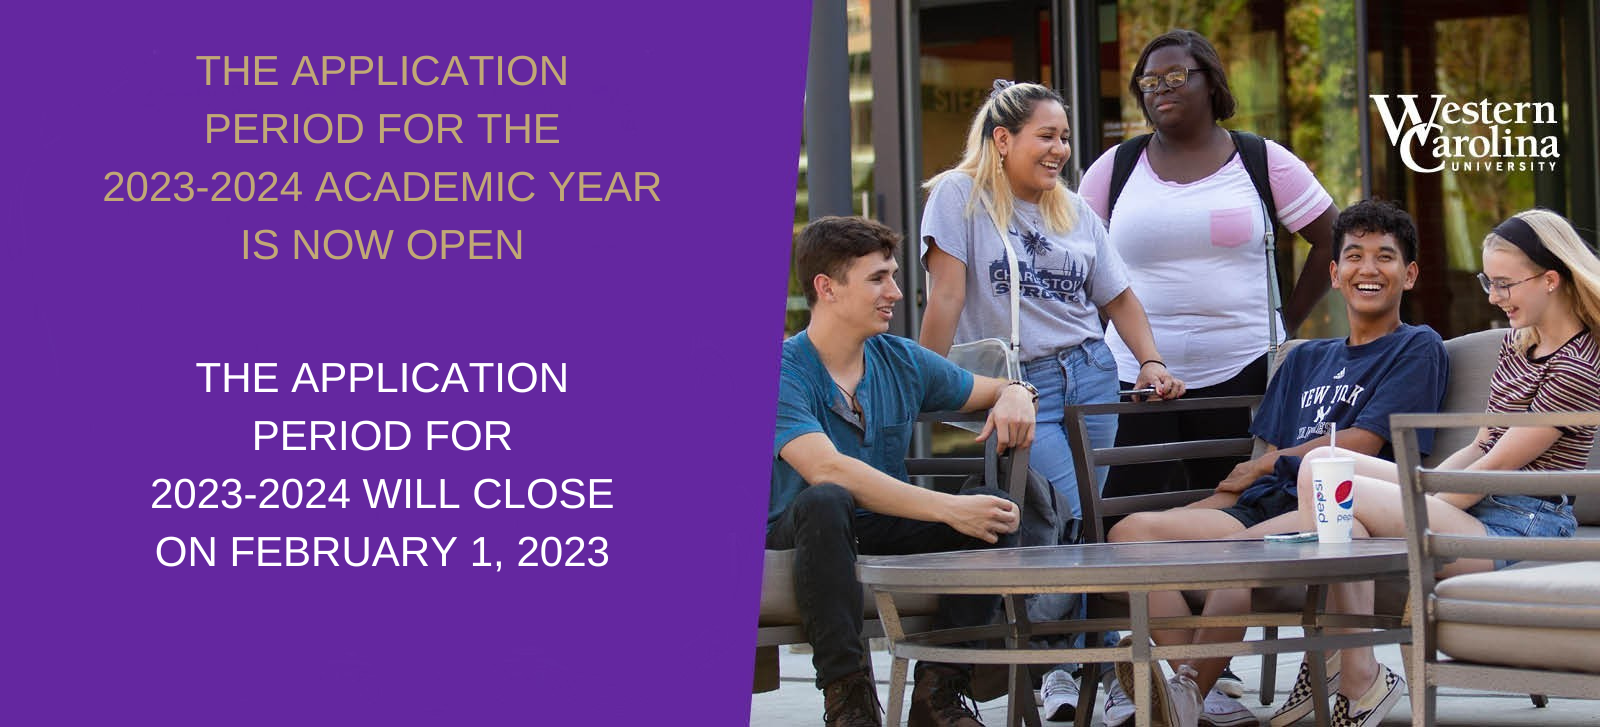 The application period for the 2022-2023 academic year is now open.